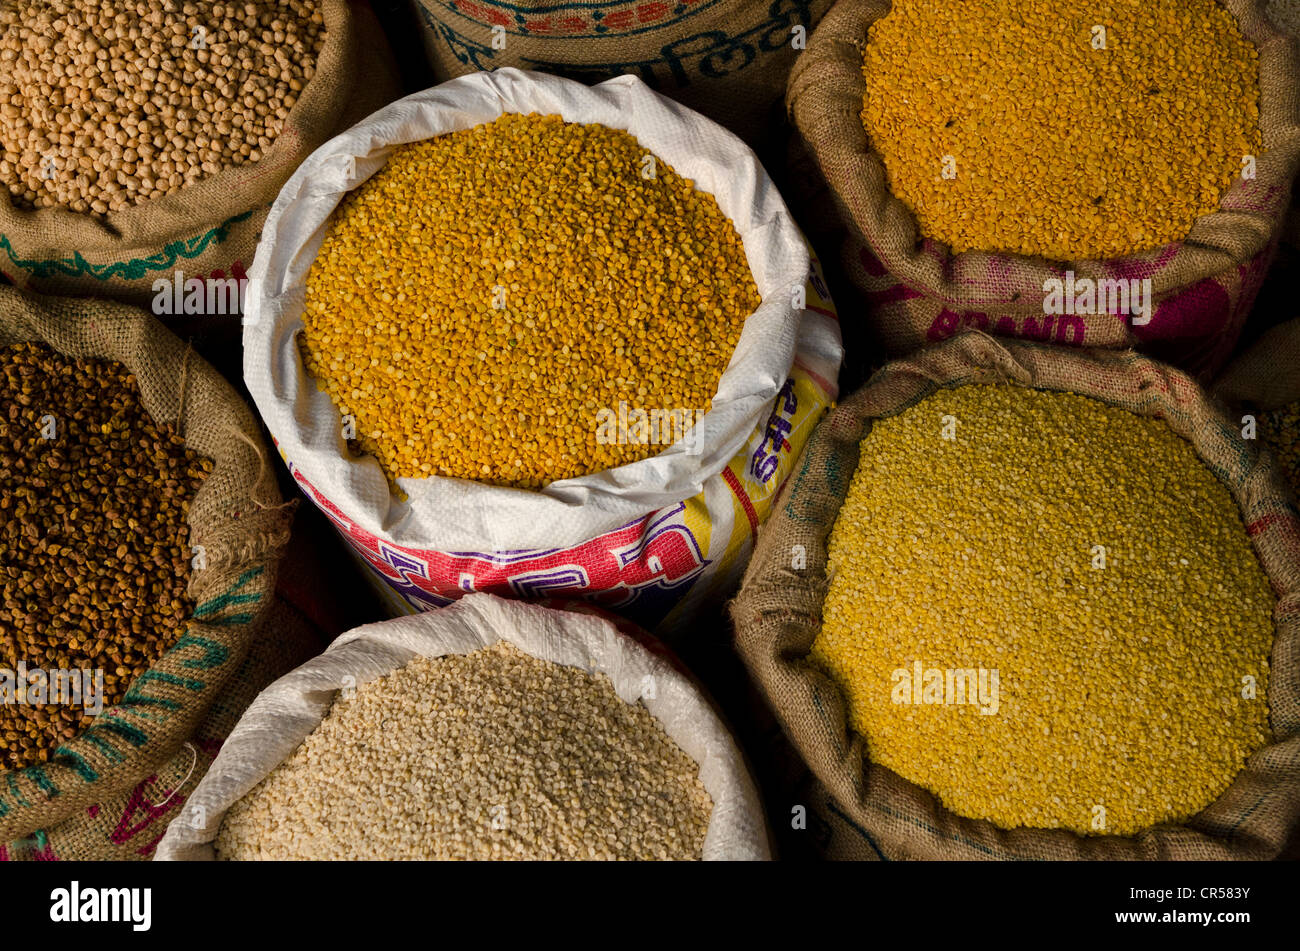 Moong Dhal, Urid Dhal and other types of lentils for sale on the market in the suburb of Paharganj, New Delhi, India, Asia Stock Photo